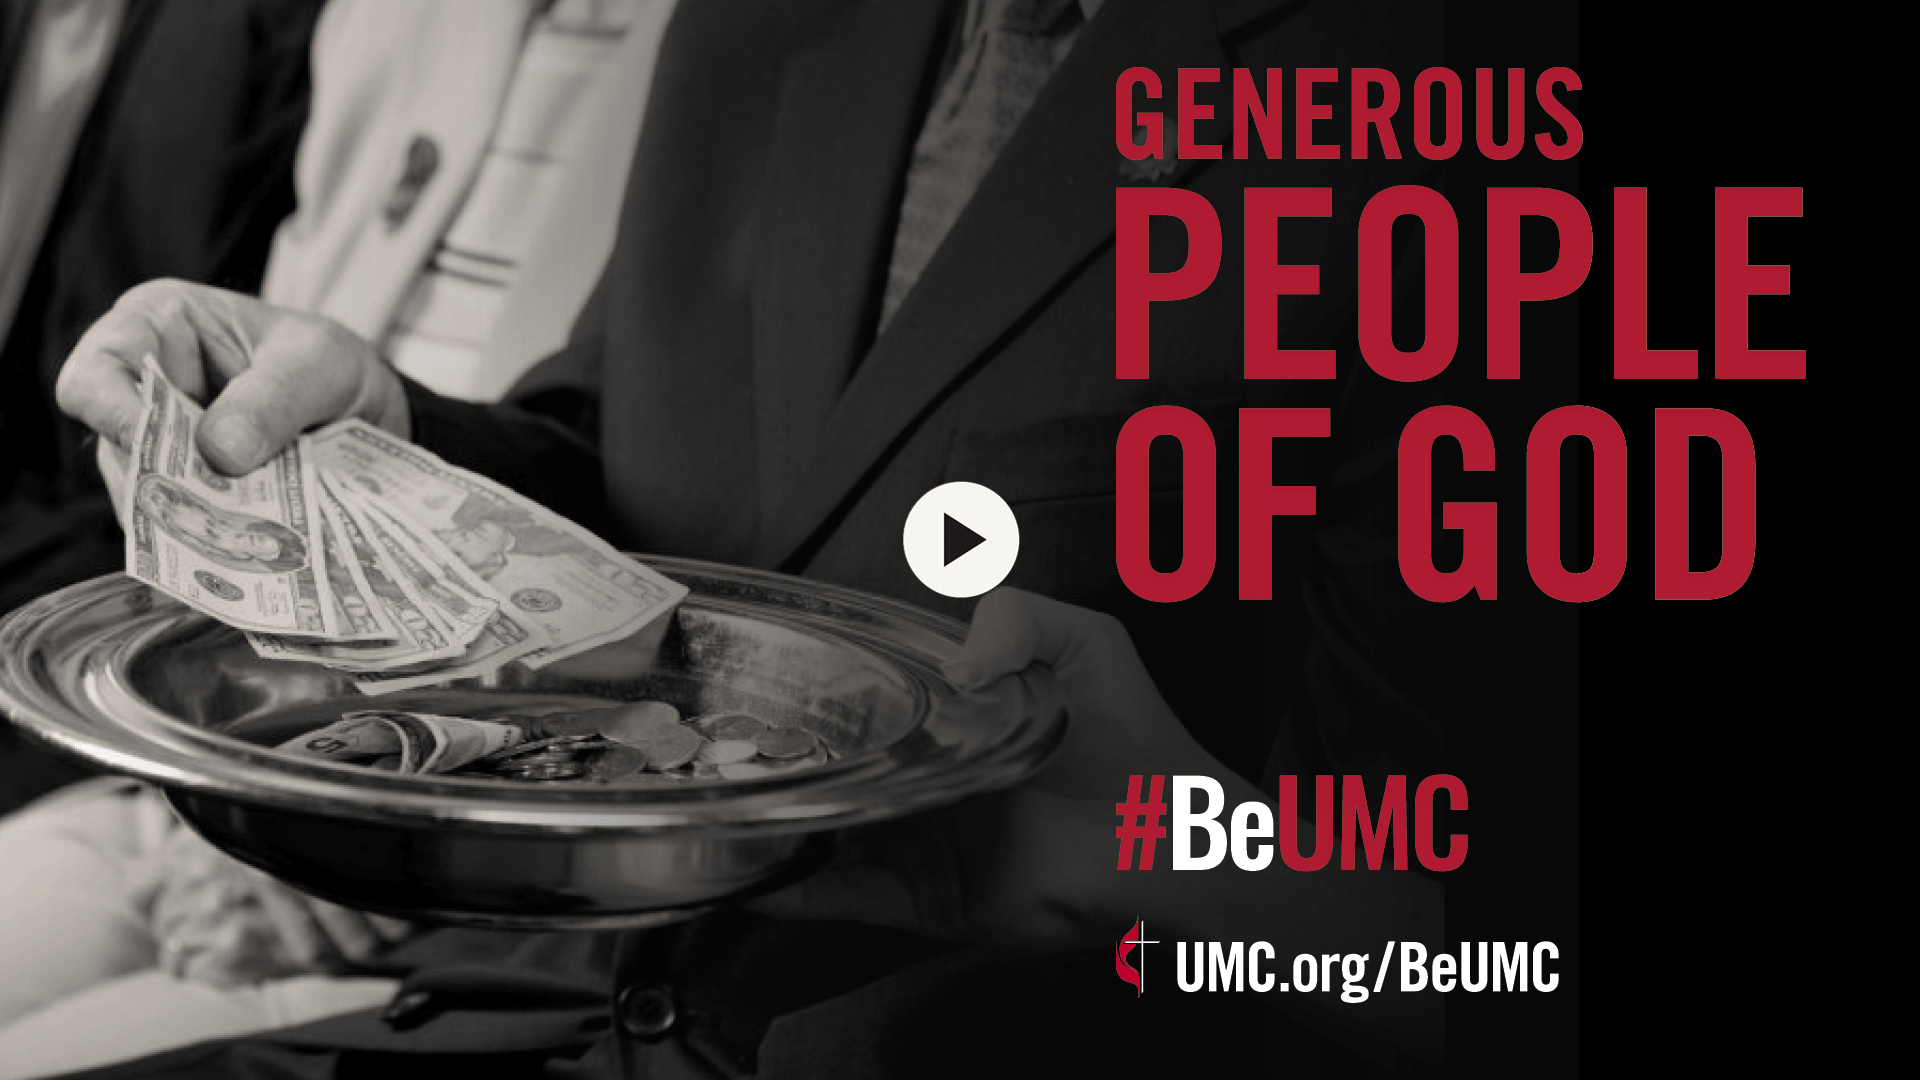 We offer our gifts and resources to serve those in need, both near and far. Video, offering. 